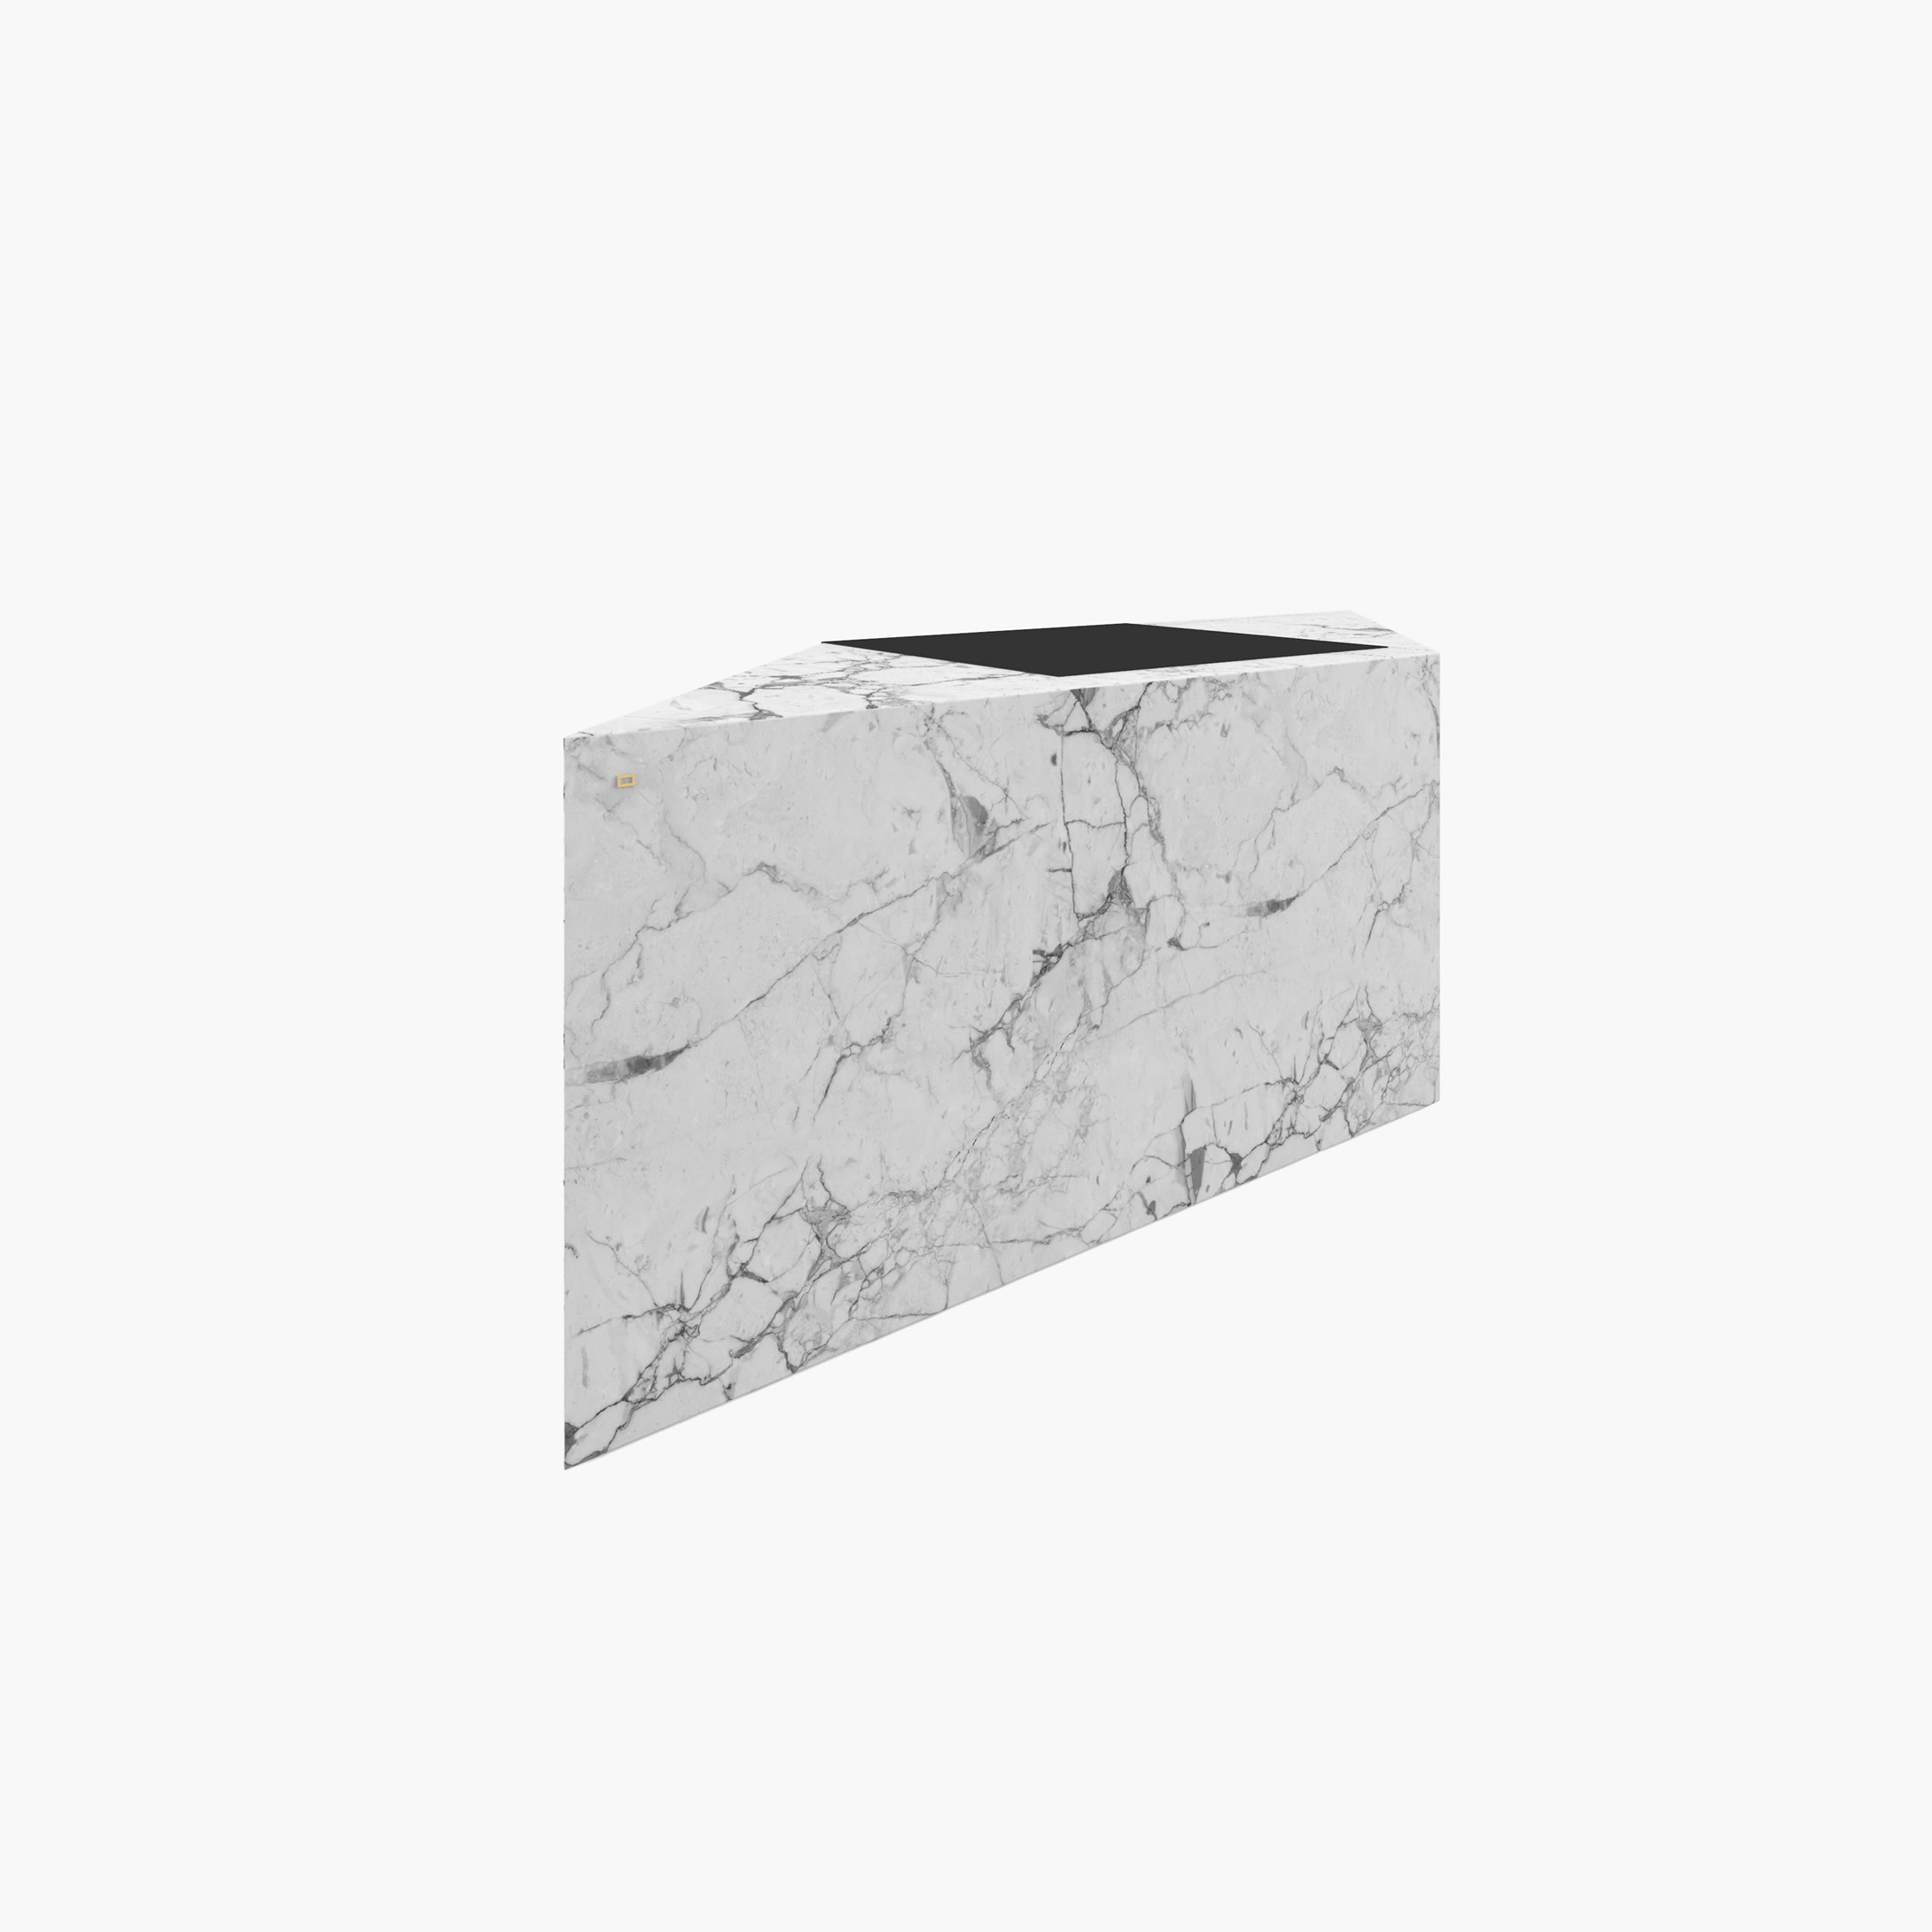 Desk small with pull out writing pads White Arabescato Marble beautiful private workspace piece of art Desks FS 438 FELIX SCHWAKE